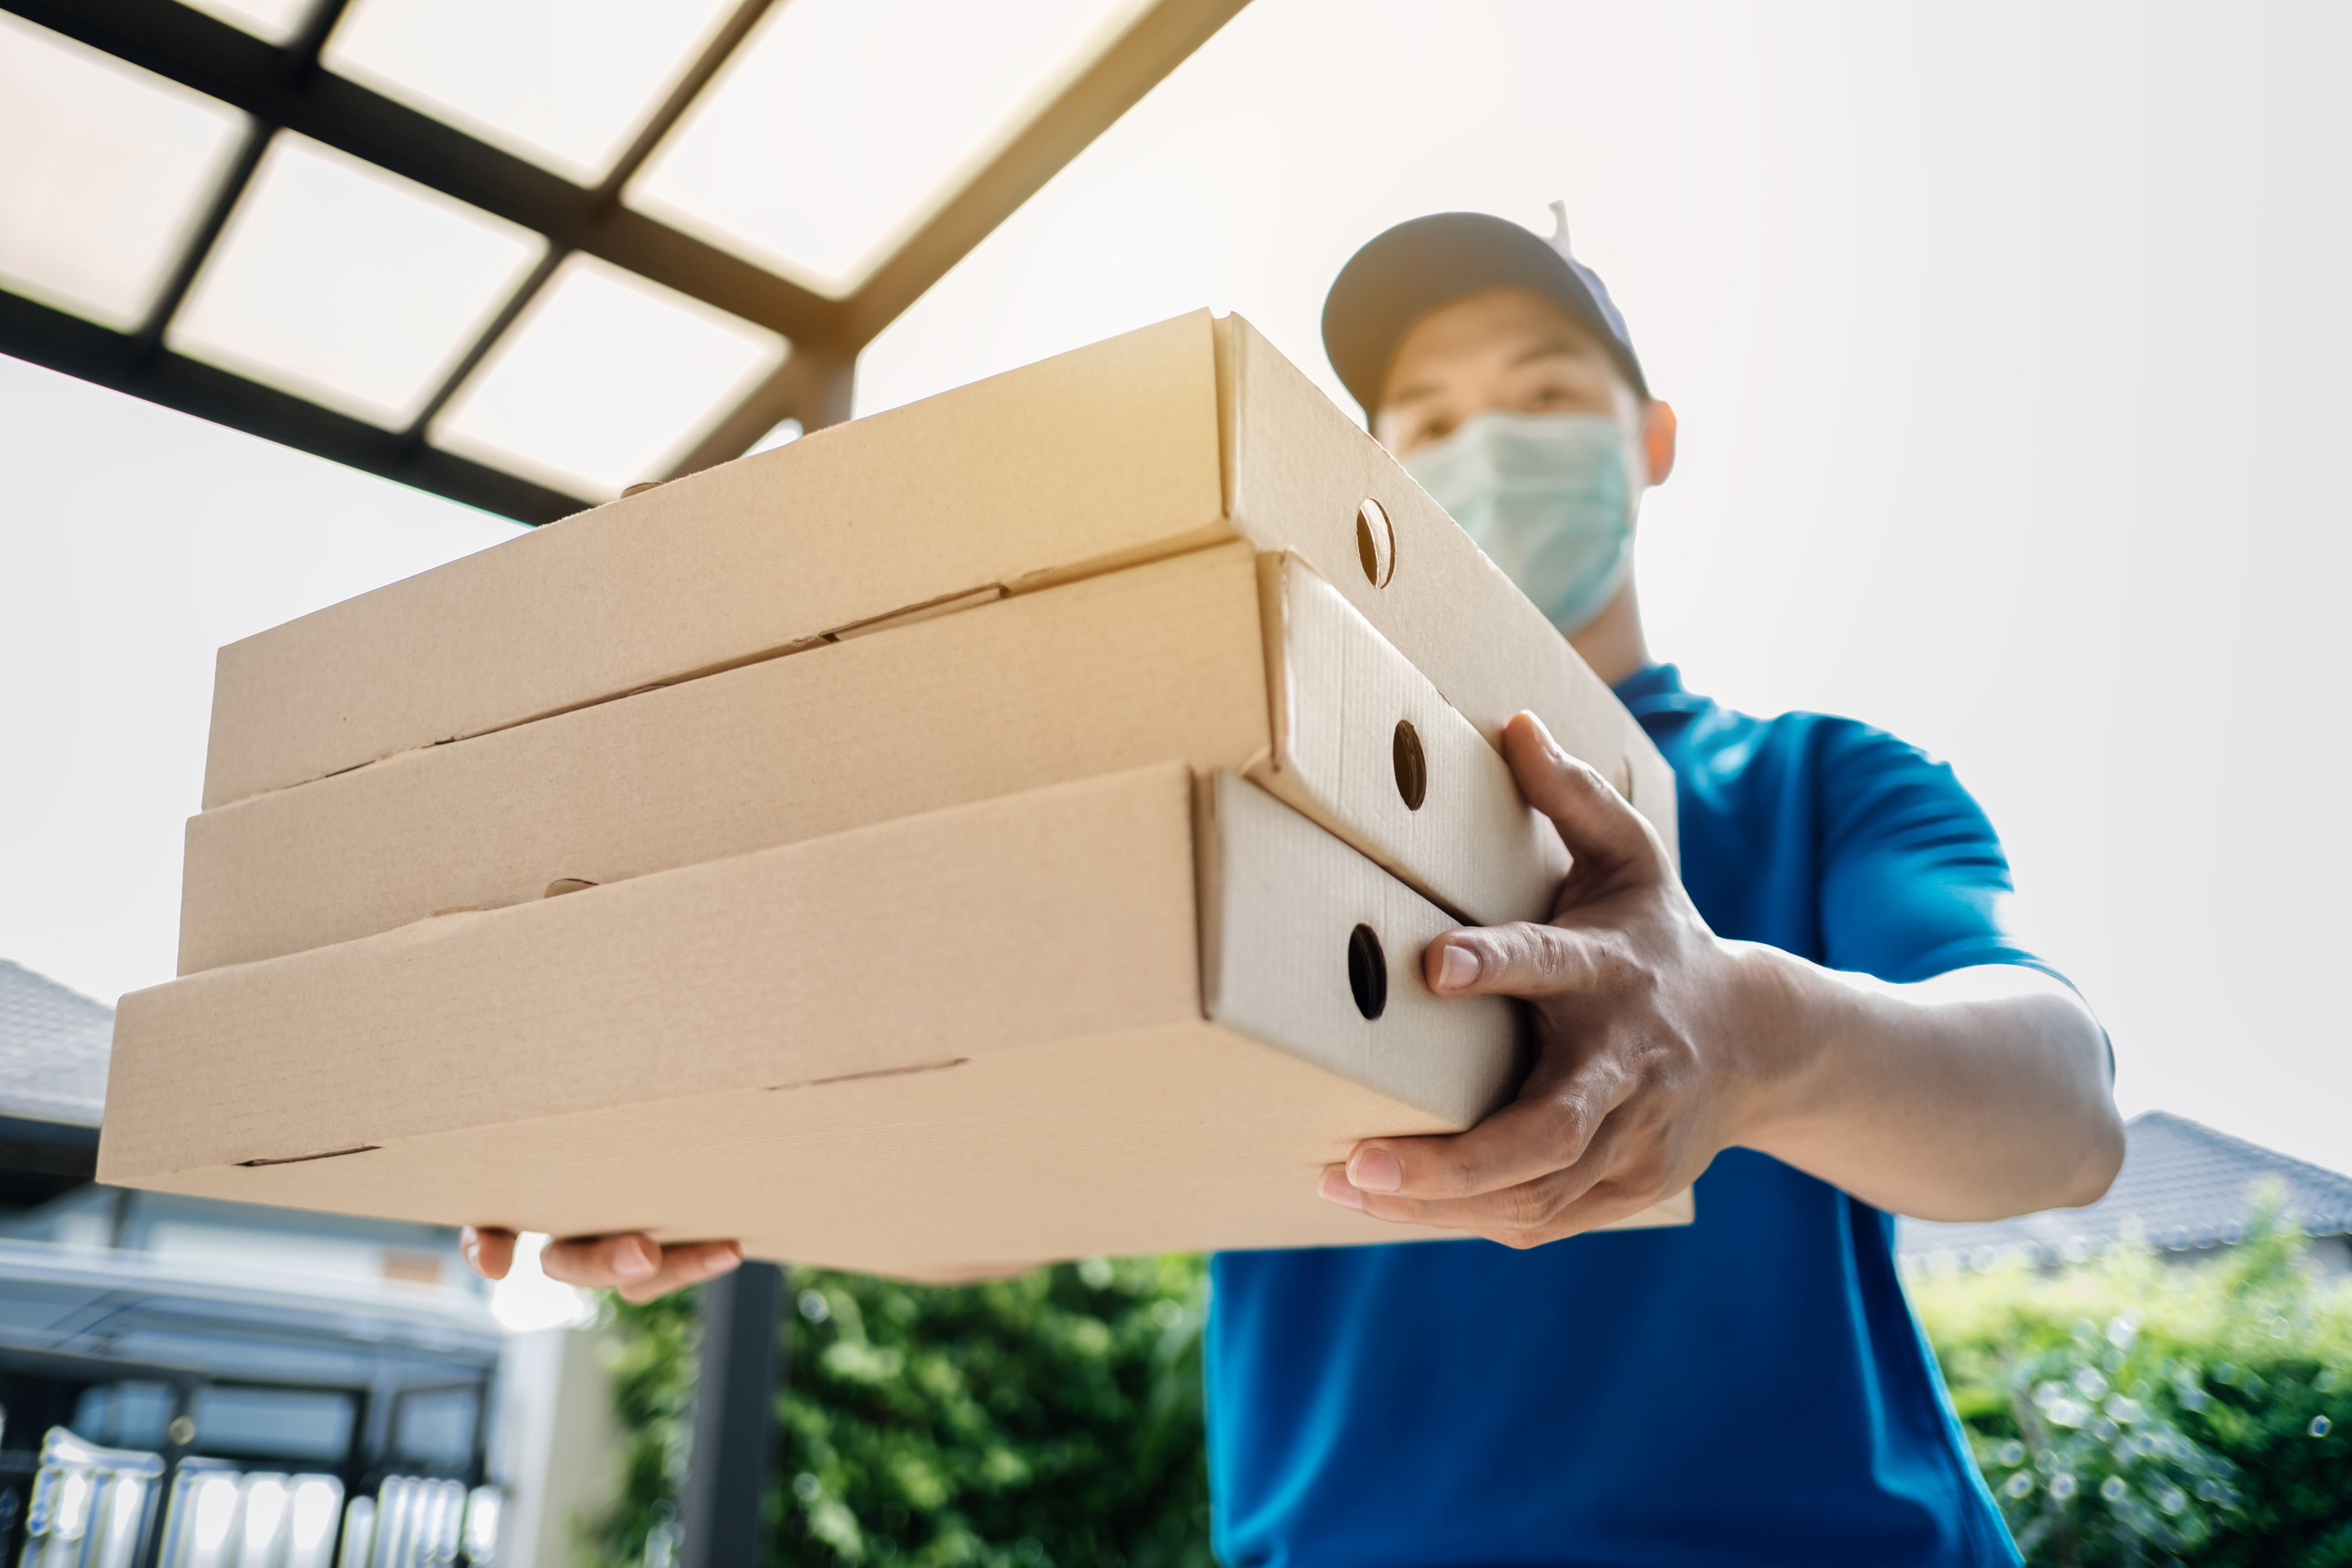 A pizza delivery man wearing a blue shirt and mask handing over three boxes of pizza